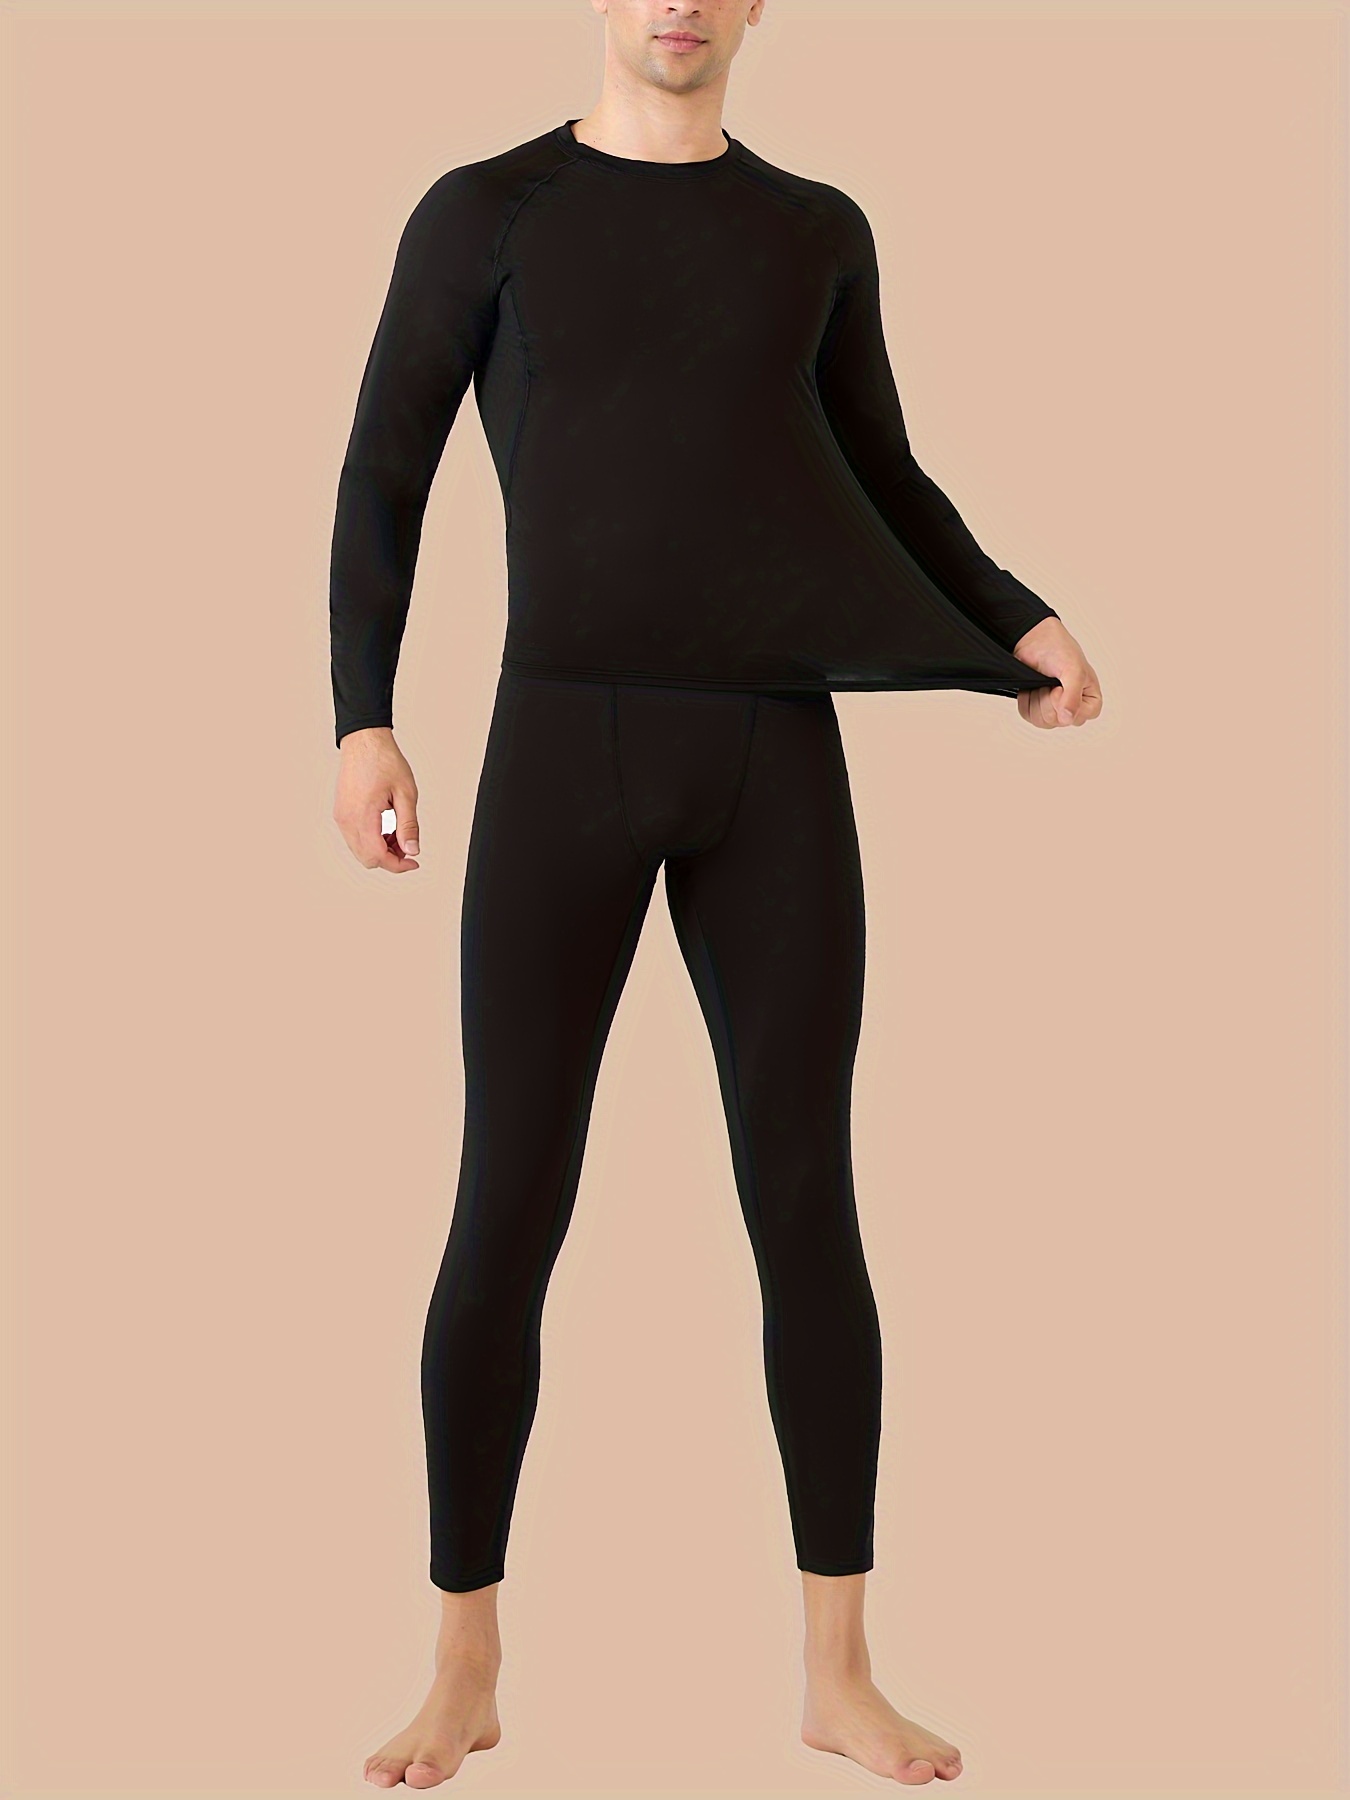 TEEPIRE Mens Thermal Underwear Set with Lightweight Ultra Soft Fleece  Lined,Long John Set, Skiing Base Layer (Small) Black at  Men's  Clothing store